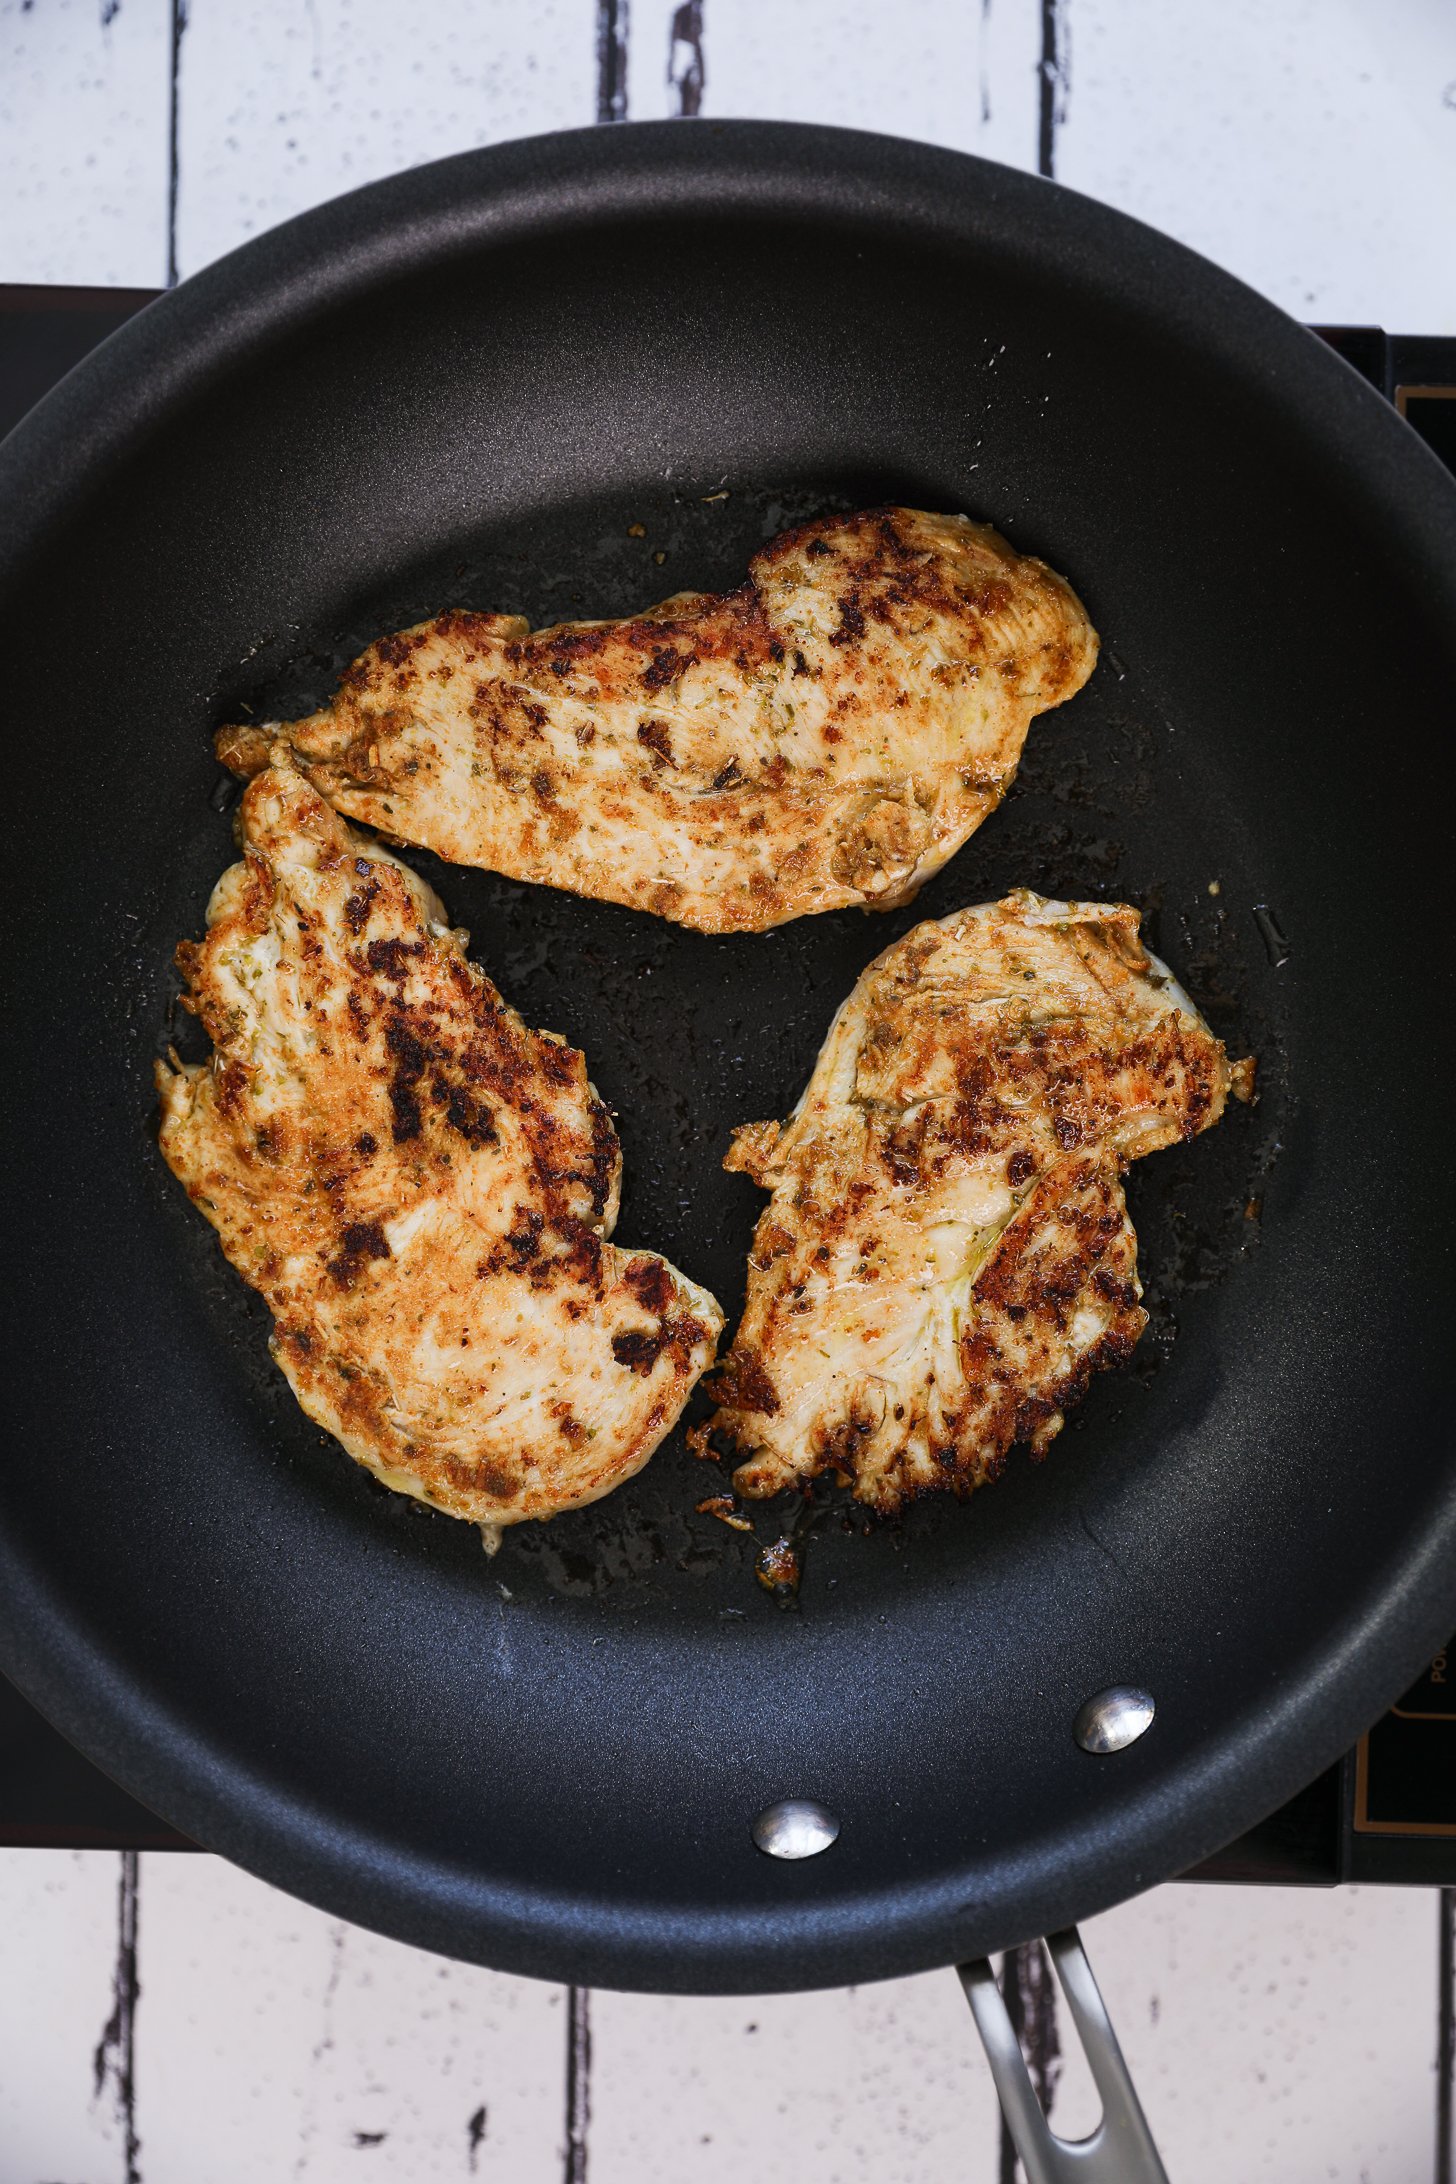 Golden fried spicy chicken cooking in a pan.